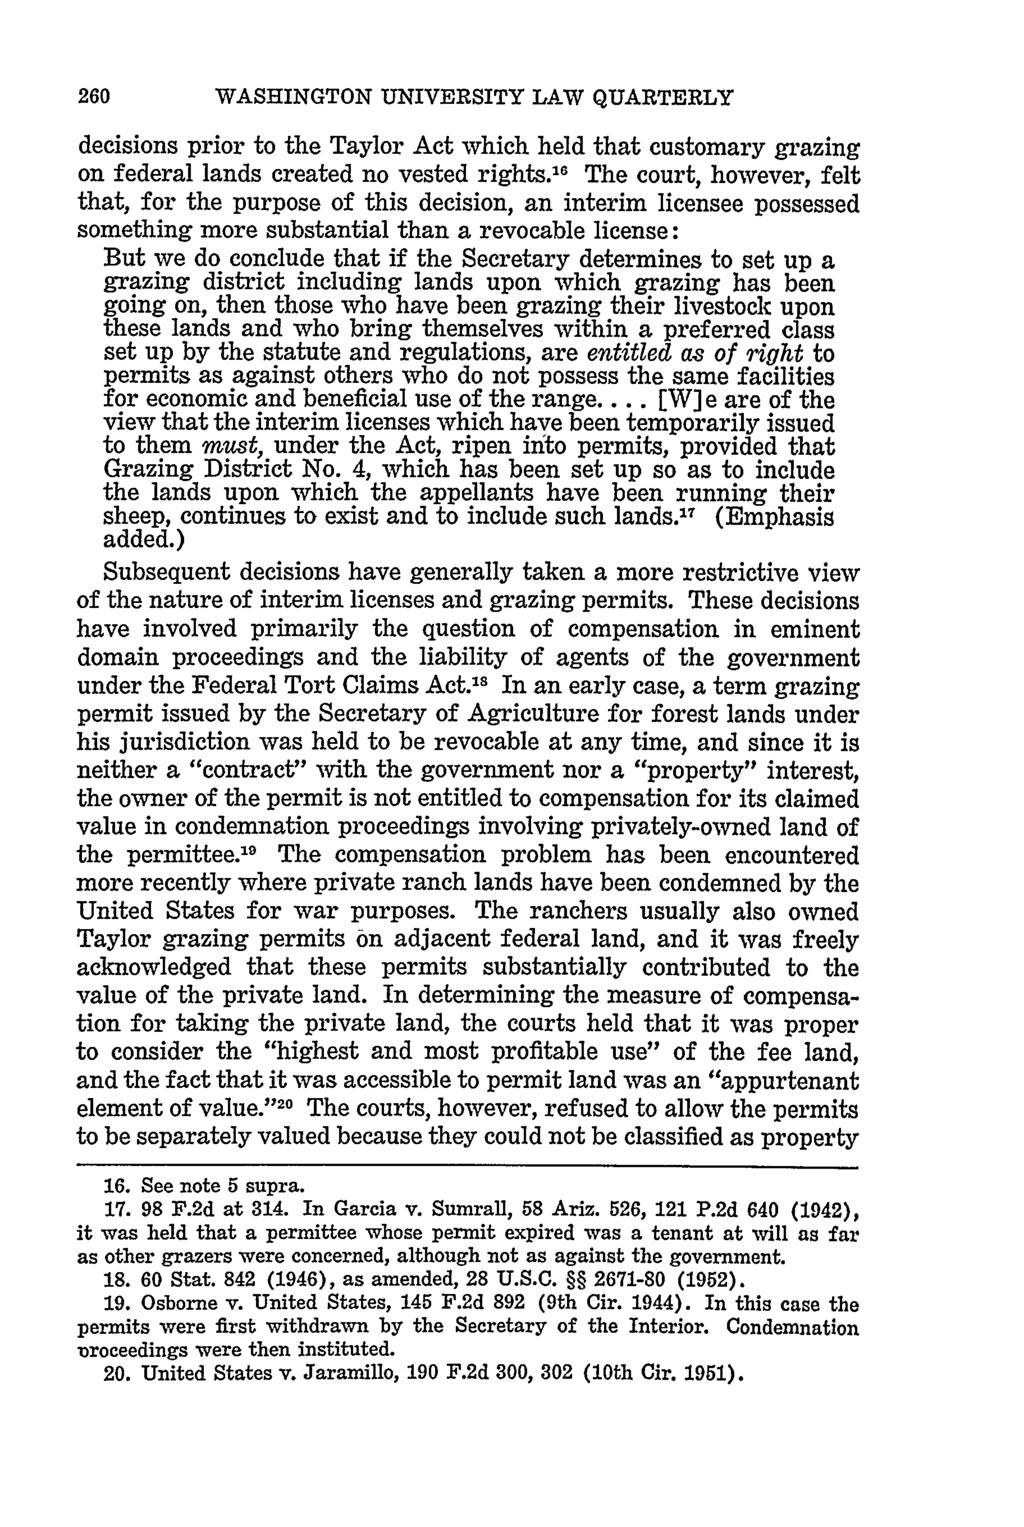 WASHINGTON UNIVERSITY LAW QUARTERLY decisions prior to the Taylor Act which held that customary grazing on federal lands created no vested rights.